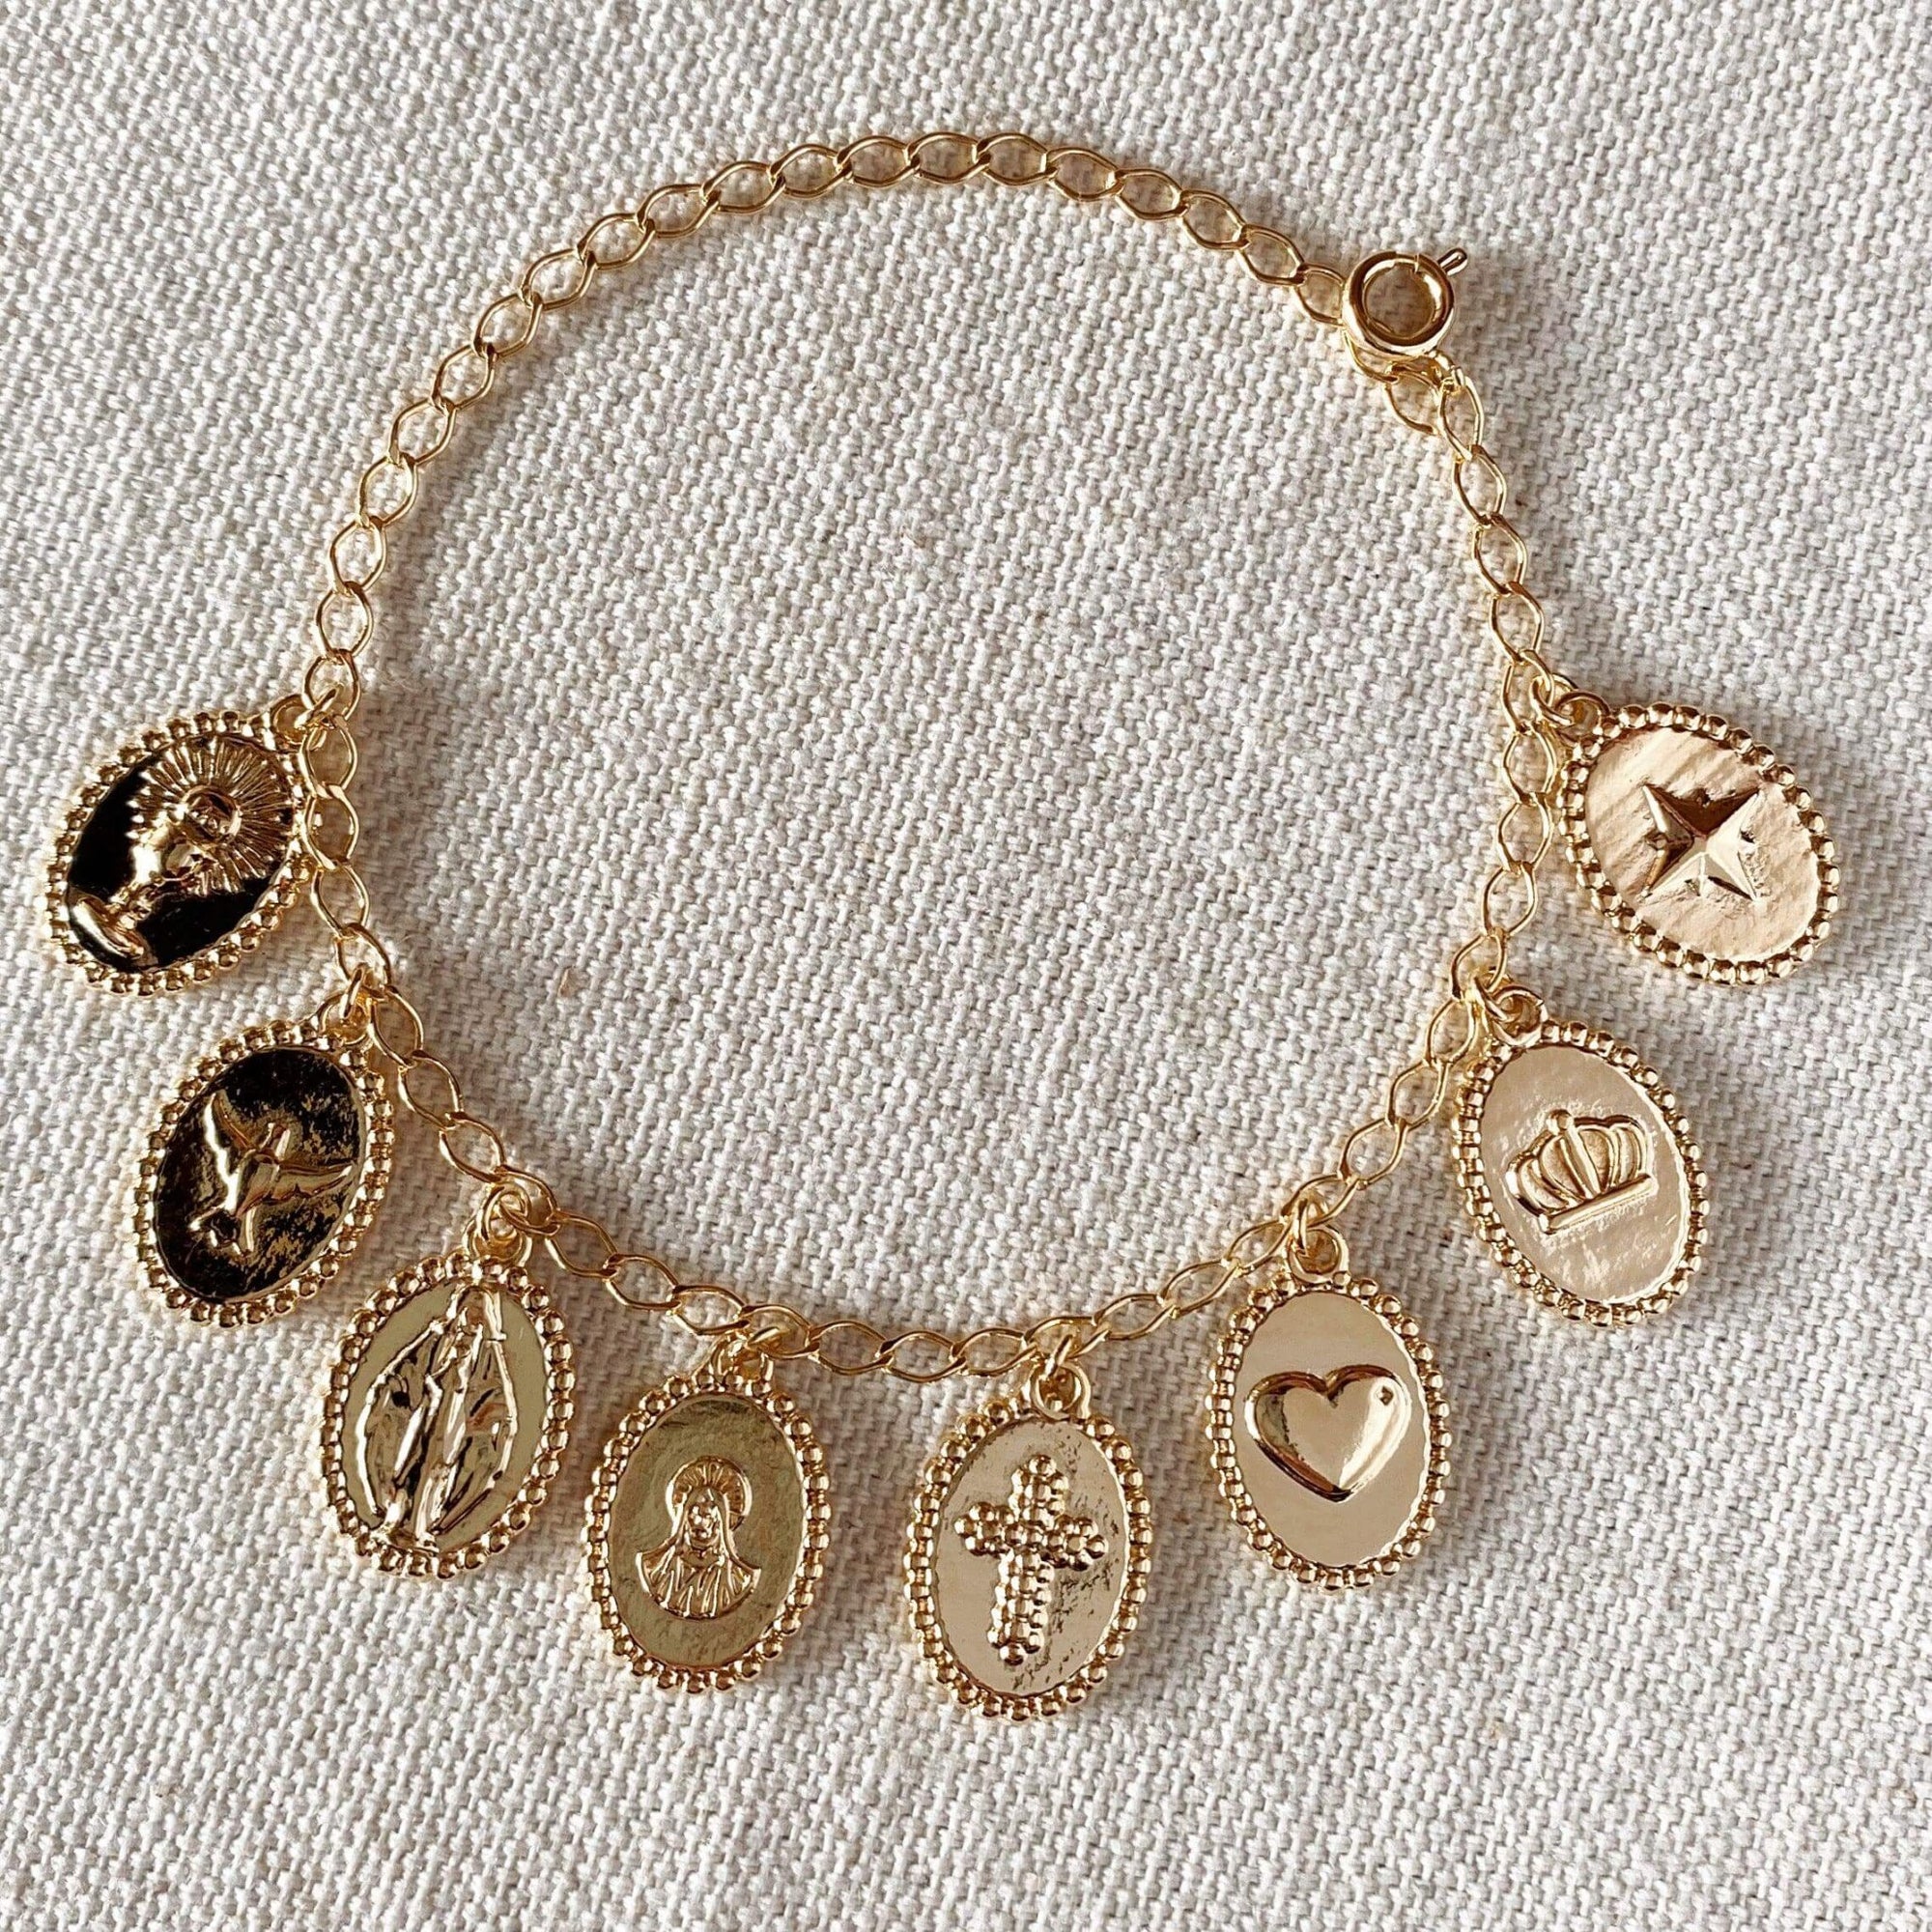 Protection and Luck Charm Bracelet- 18k Gold Filled Abigail Fox Jewelry - Abigail Fox Designs